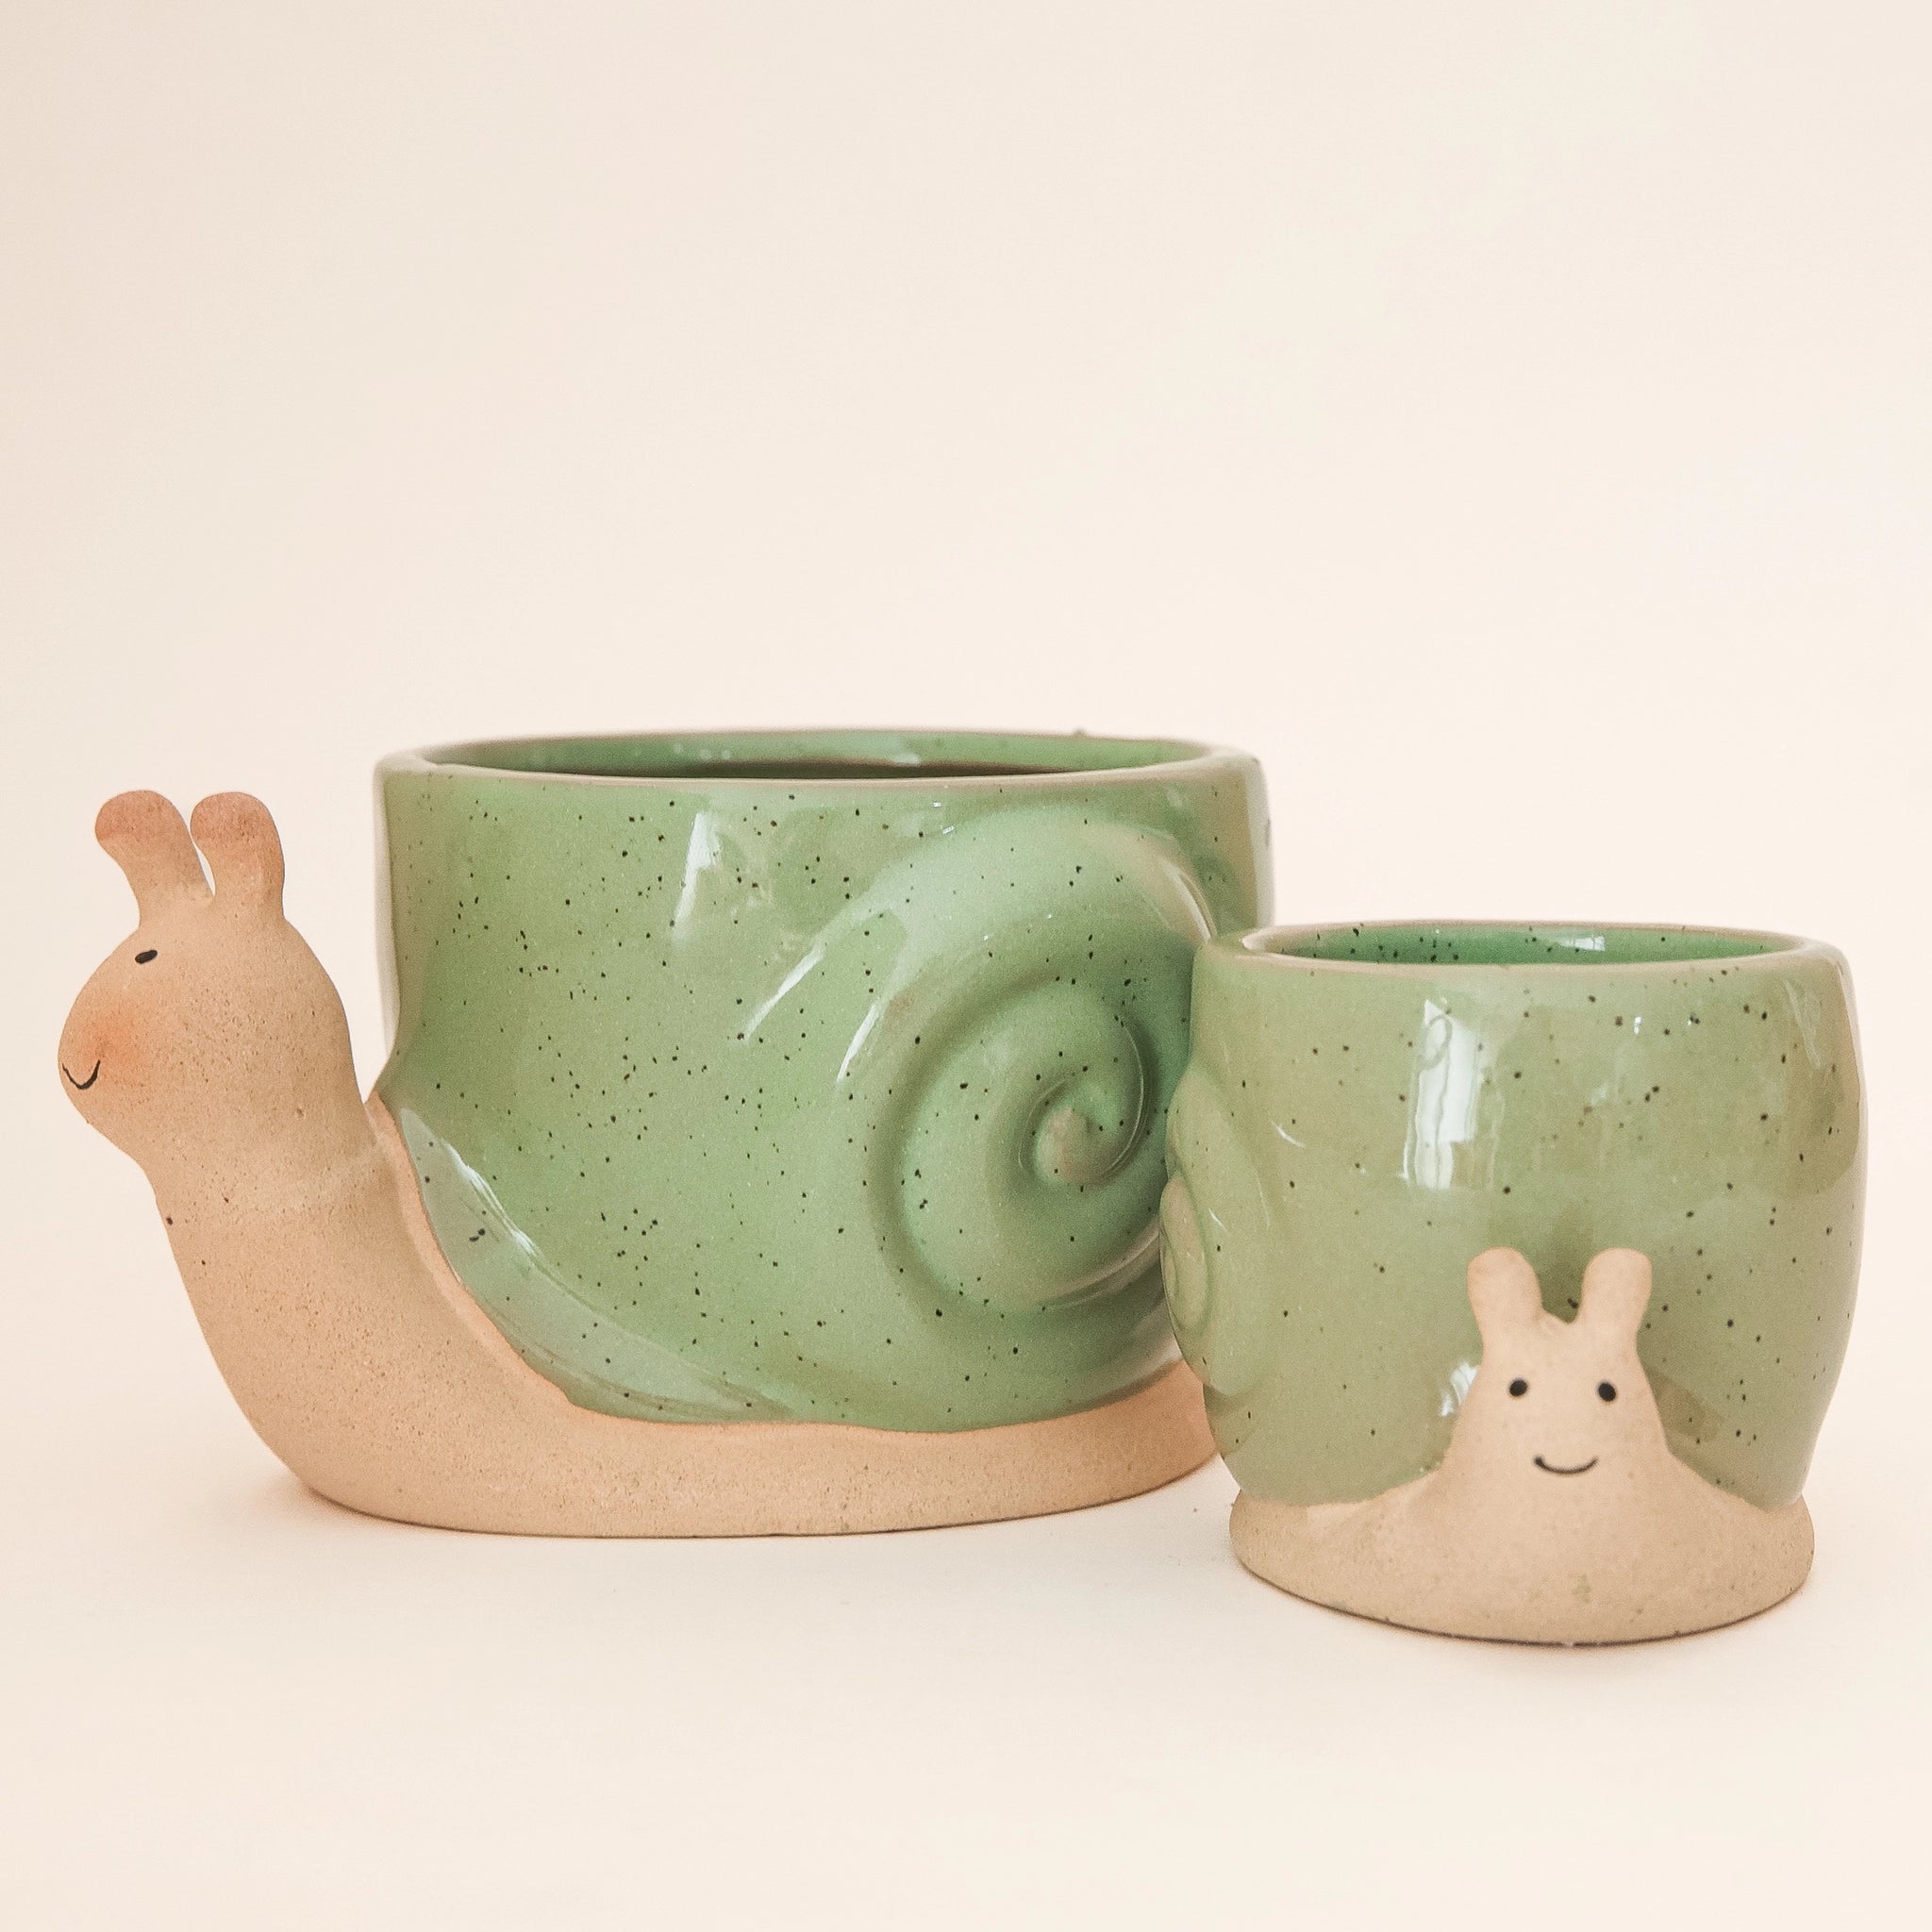 On a tan background is two ceramic planters in the shape of a snail with smiling faces and a swirly green &quot;shell&quot;.